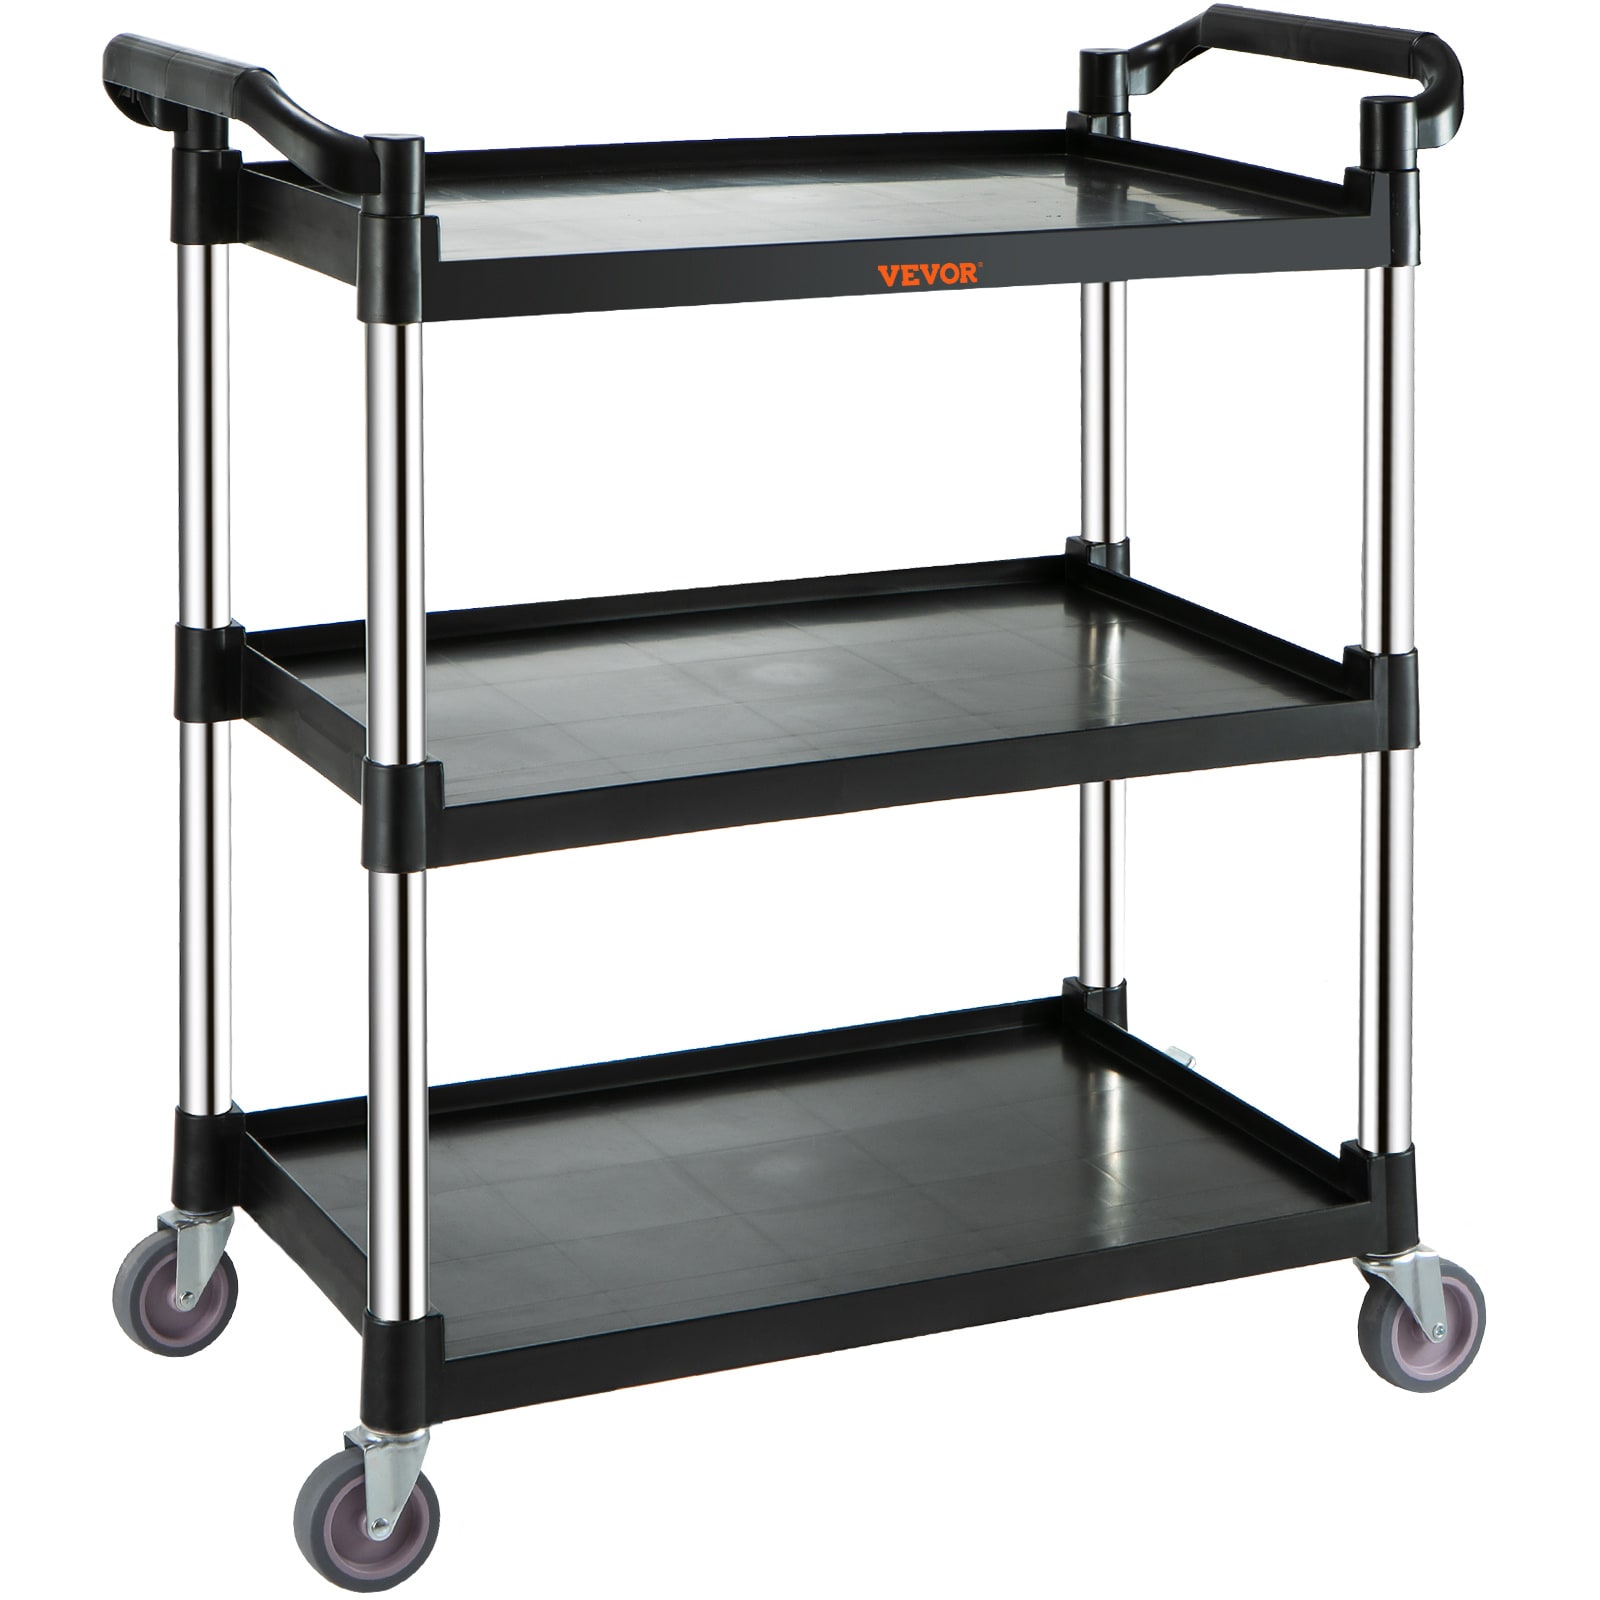 Rolling Storage Carts for sale in Connersville, Indiana